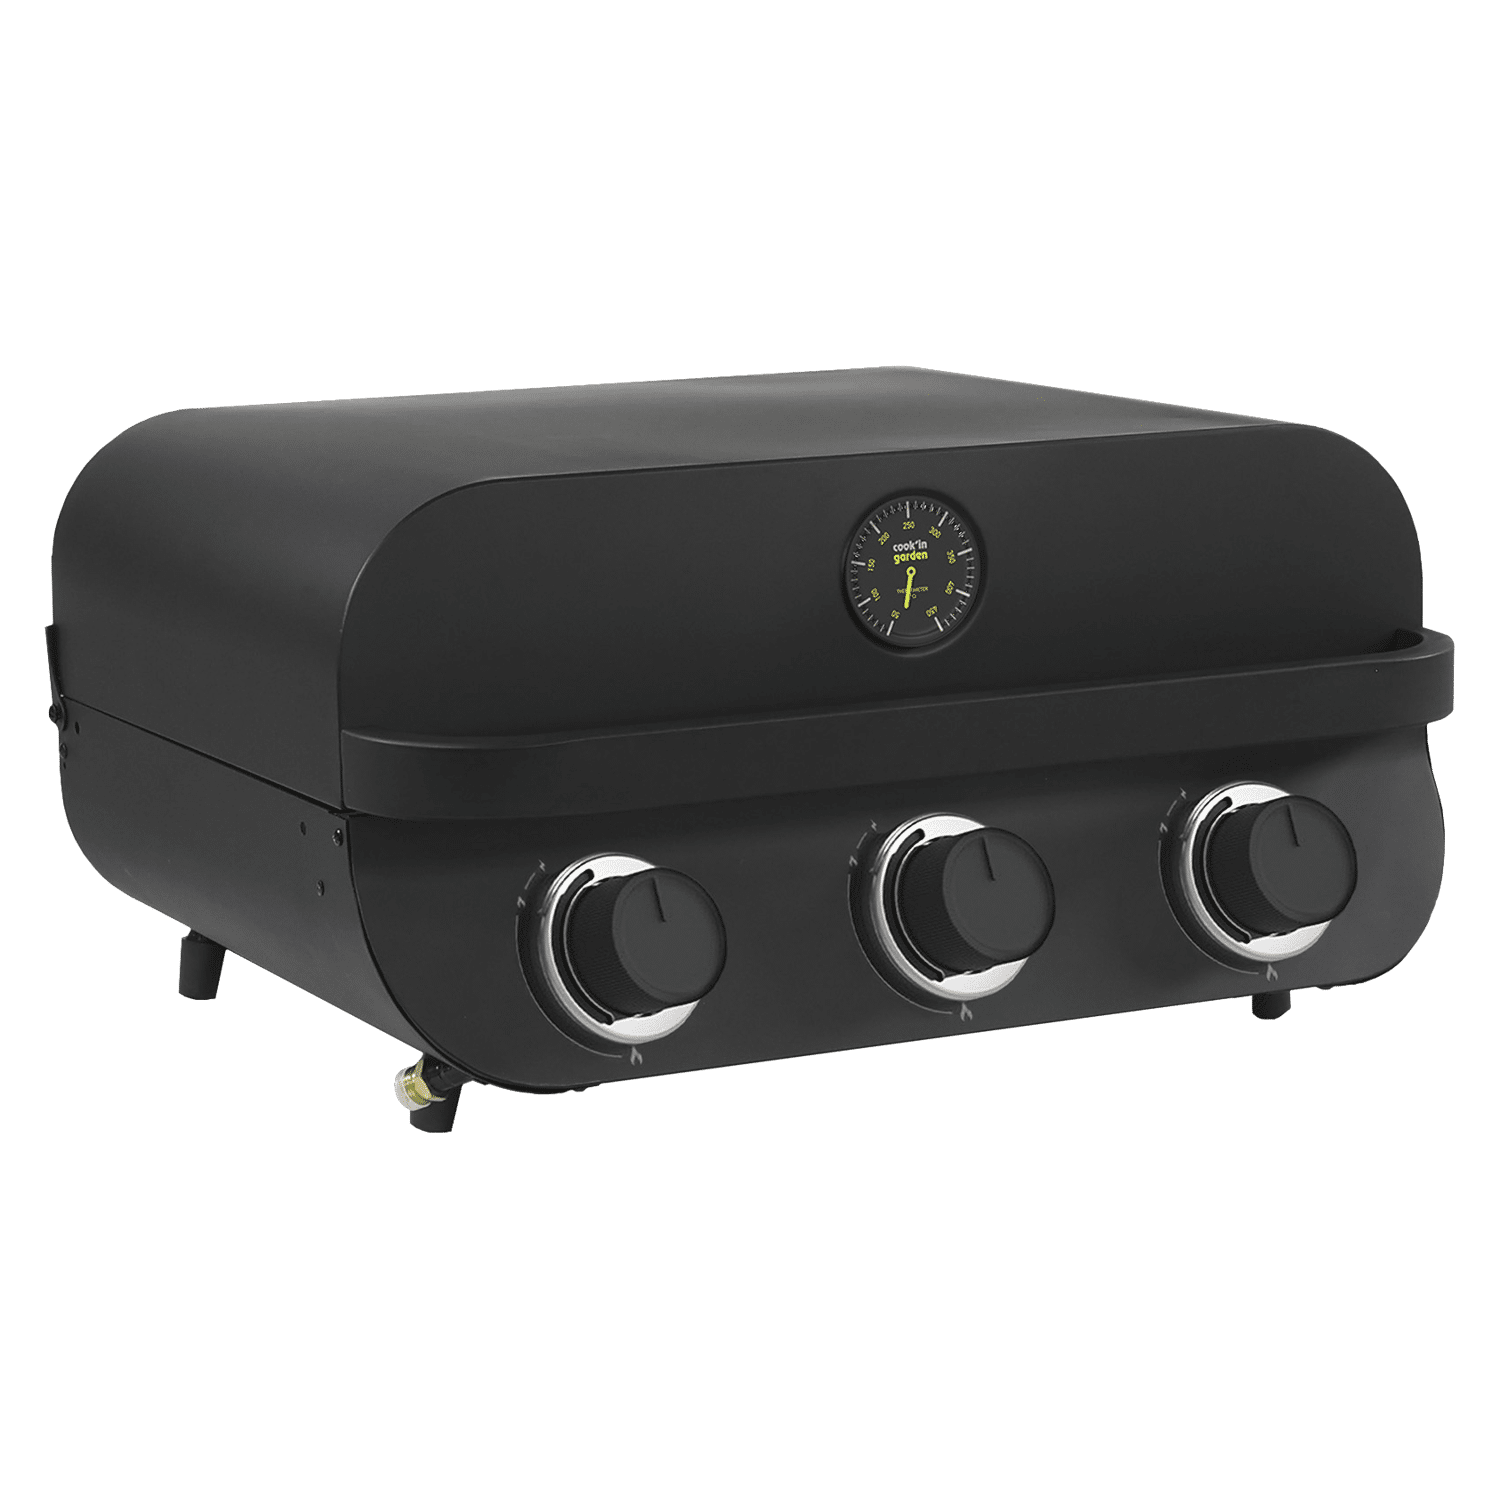 Cook'in Garden - FLAVO 60 gasbarbecue